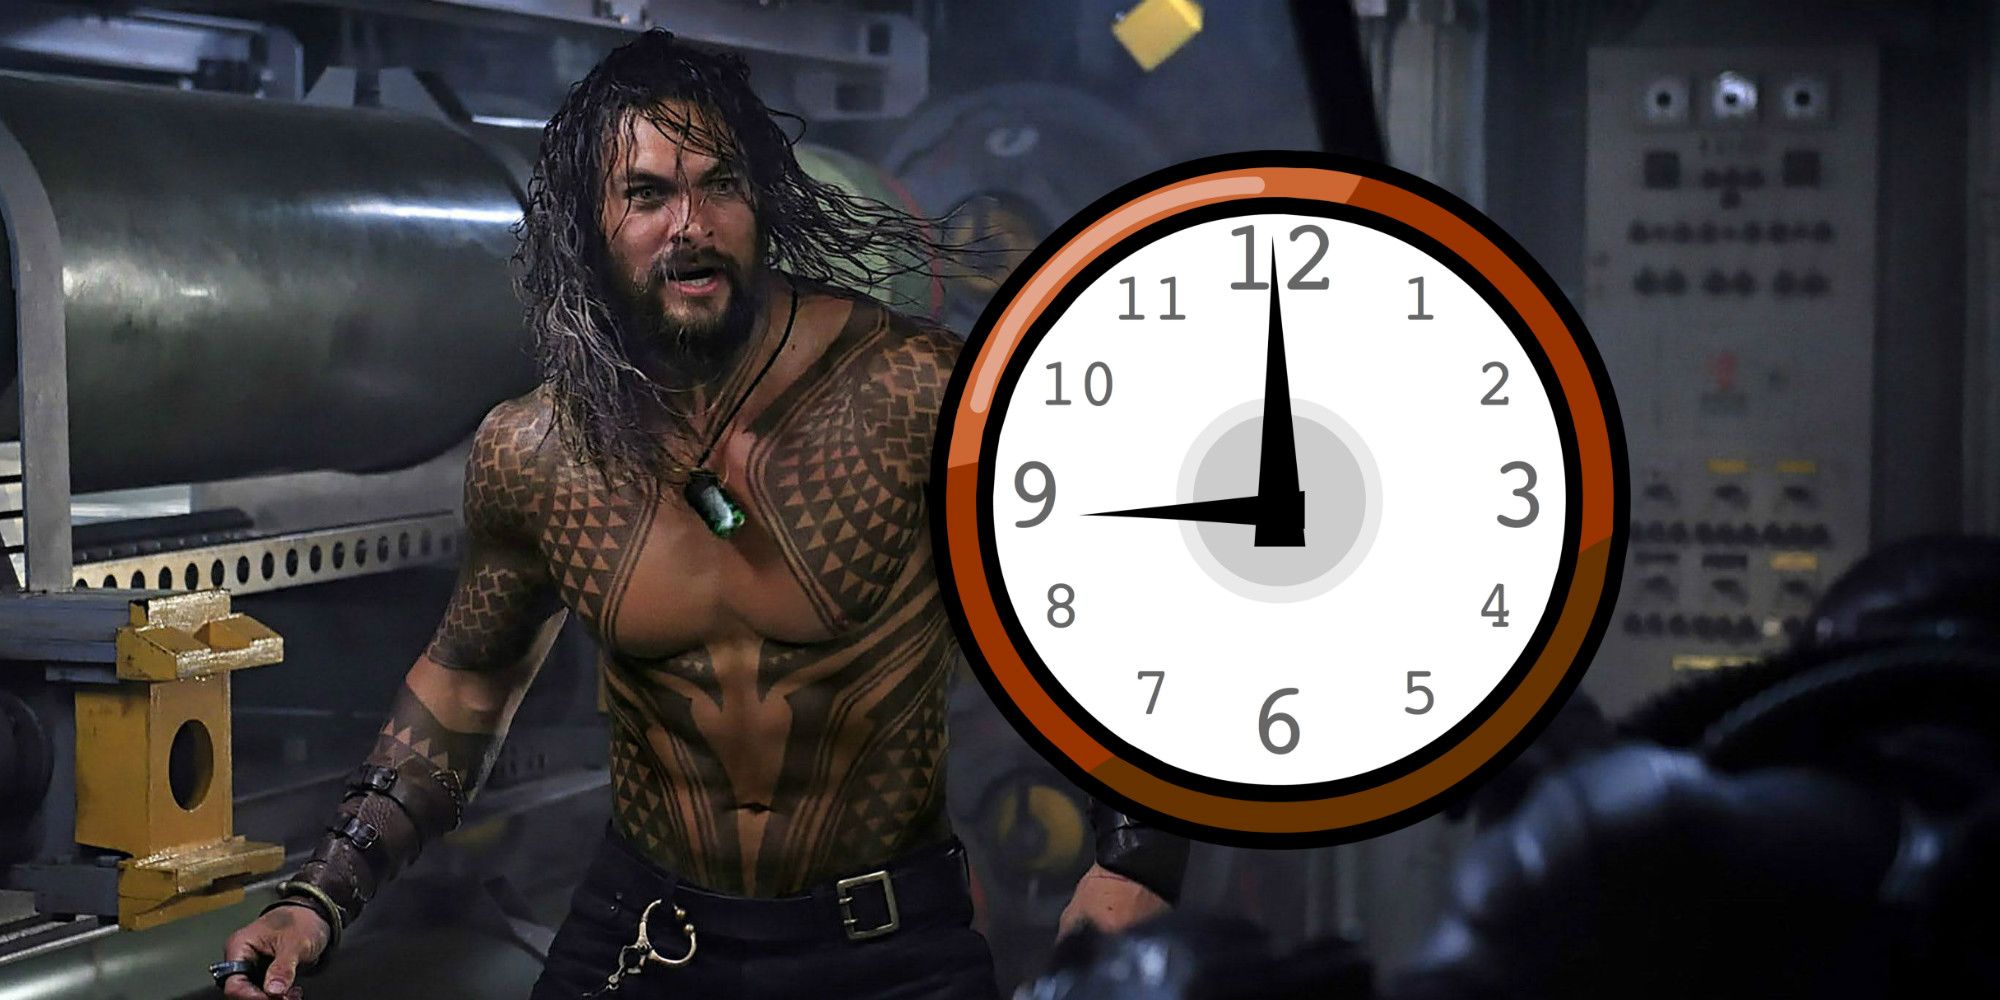 When Will Warner Bros. Release the First Aquaman Trailer? [UPDATED]